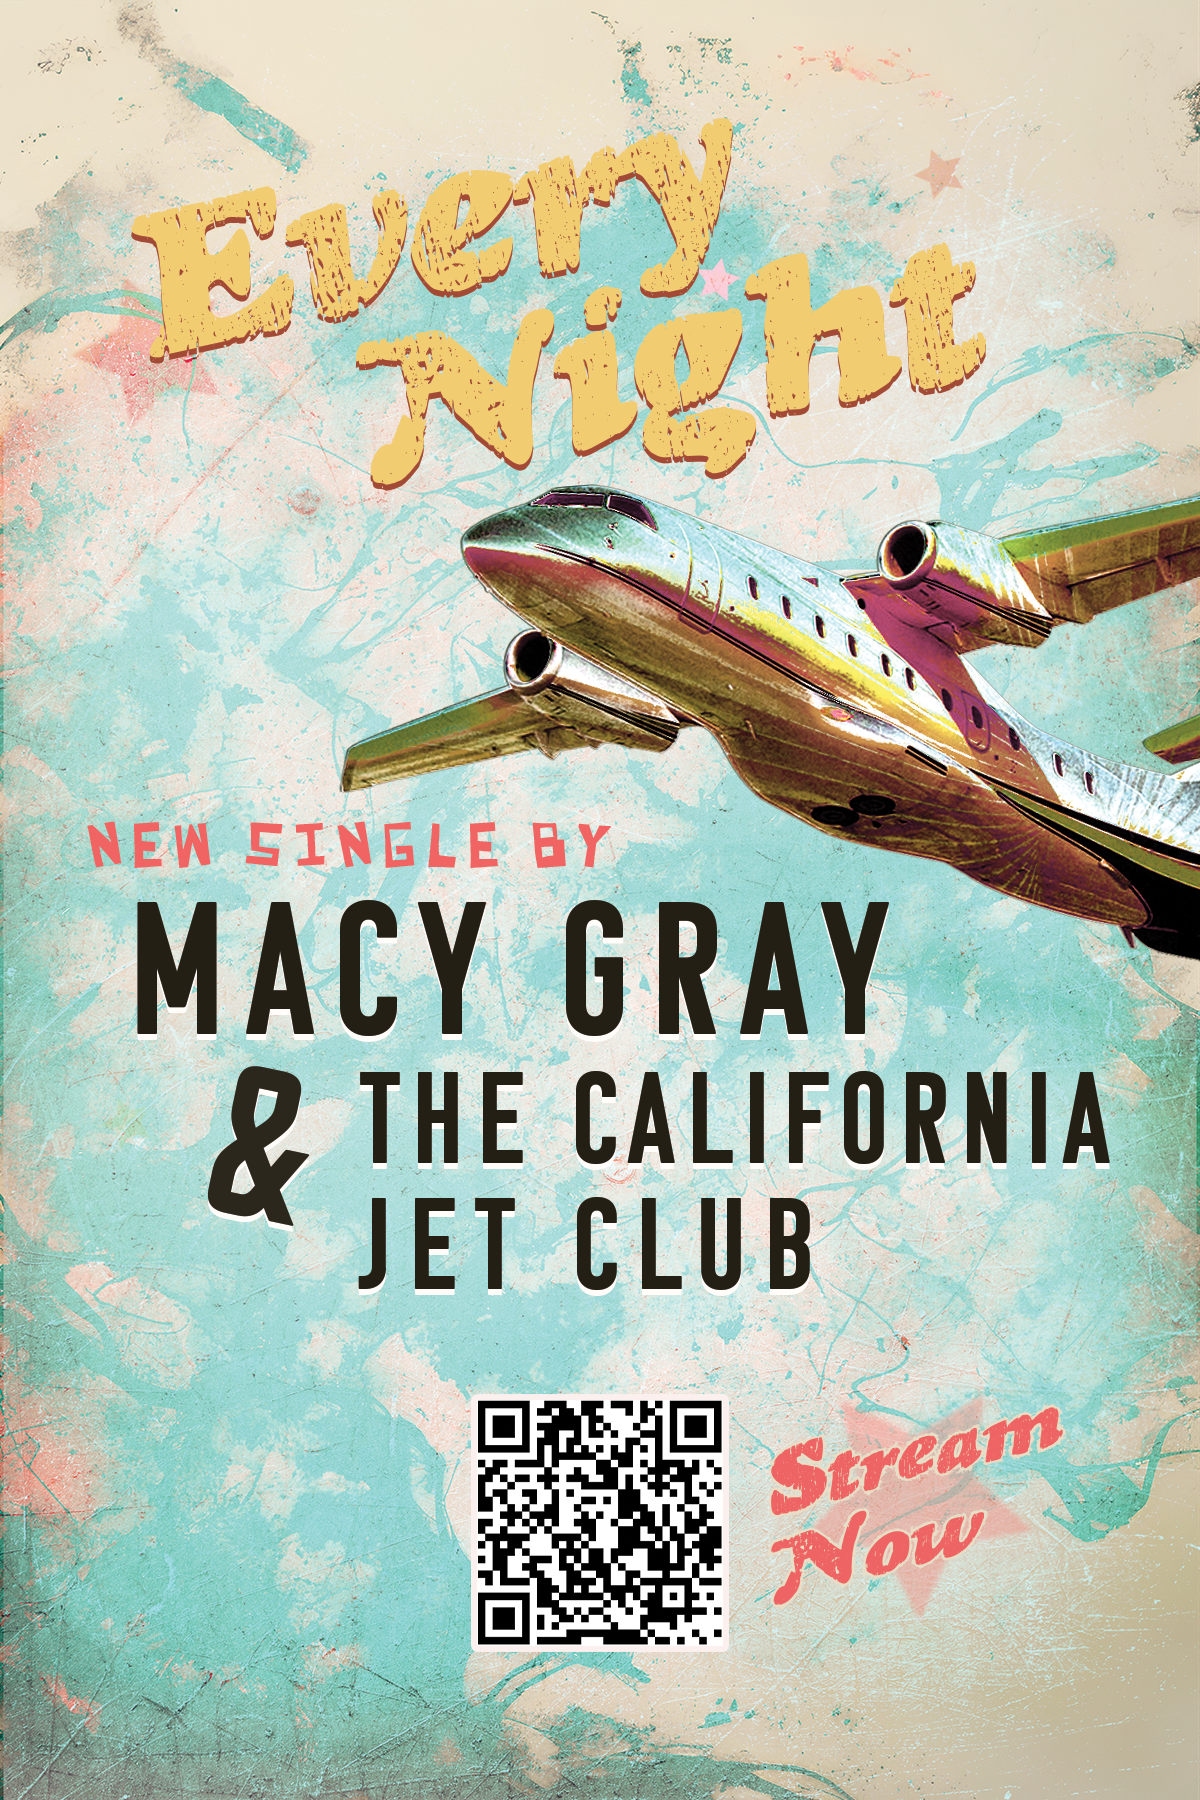 Promotional Poster Design for Macy Gray's single 'Every Night'